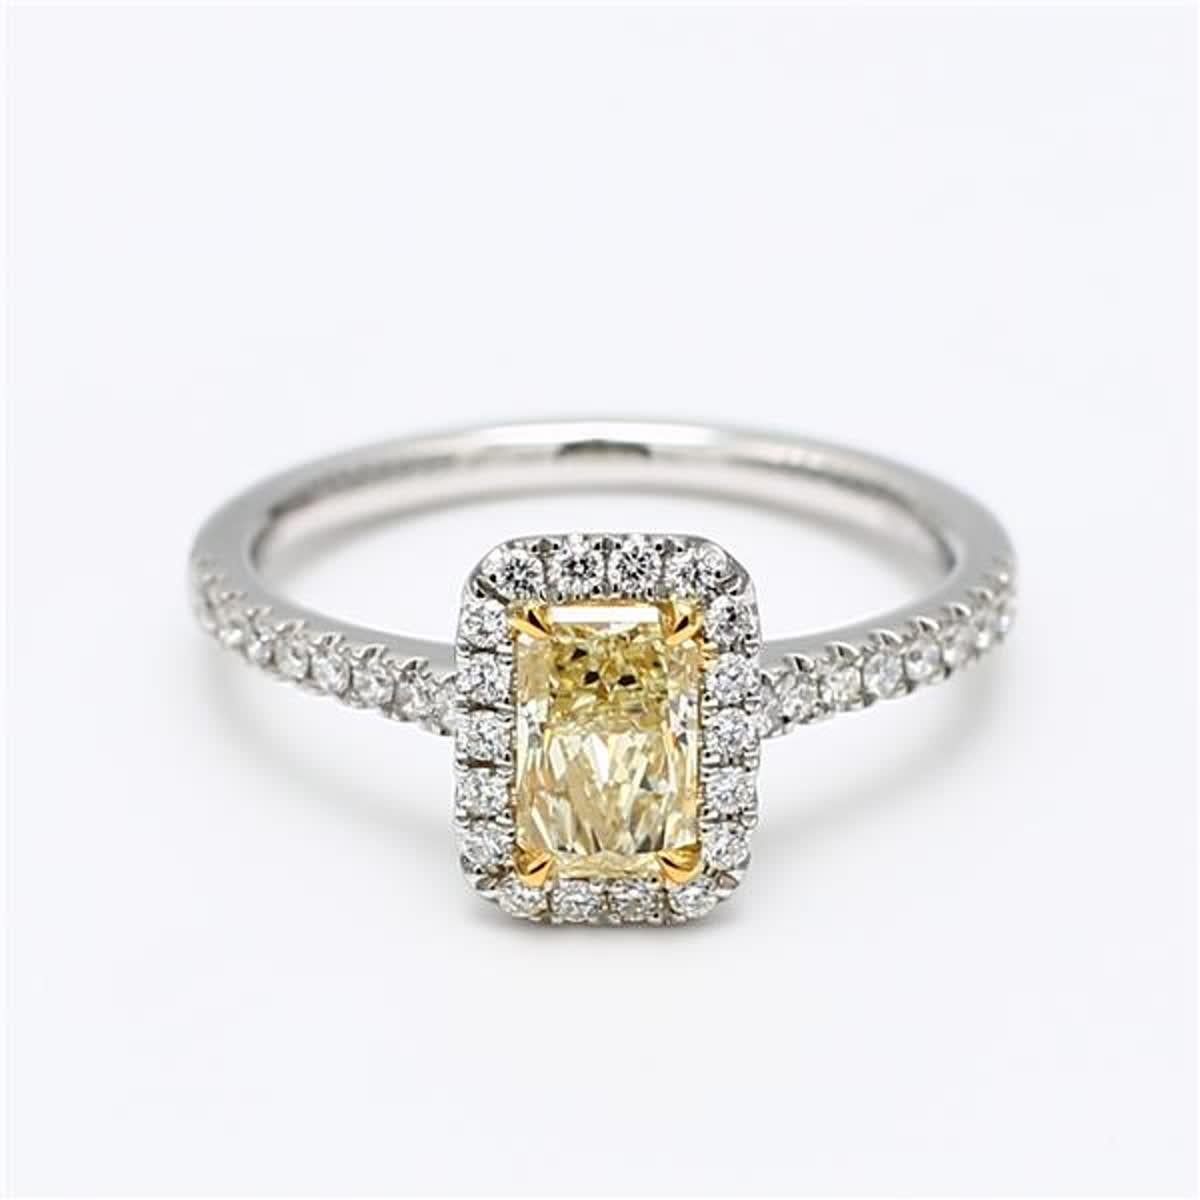 RareGemWorld's classic GIA certified diamond ring. Mounted in a beautiful 18K Yellow and White Gold and Platinum setting with a natural radiant cut yellow diamond. The yellow diamond is surrounded by small round natural white diamond melee. This